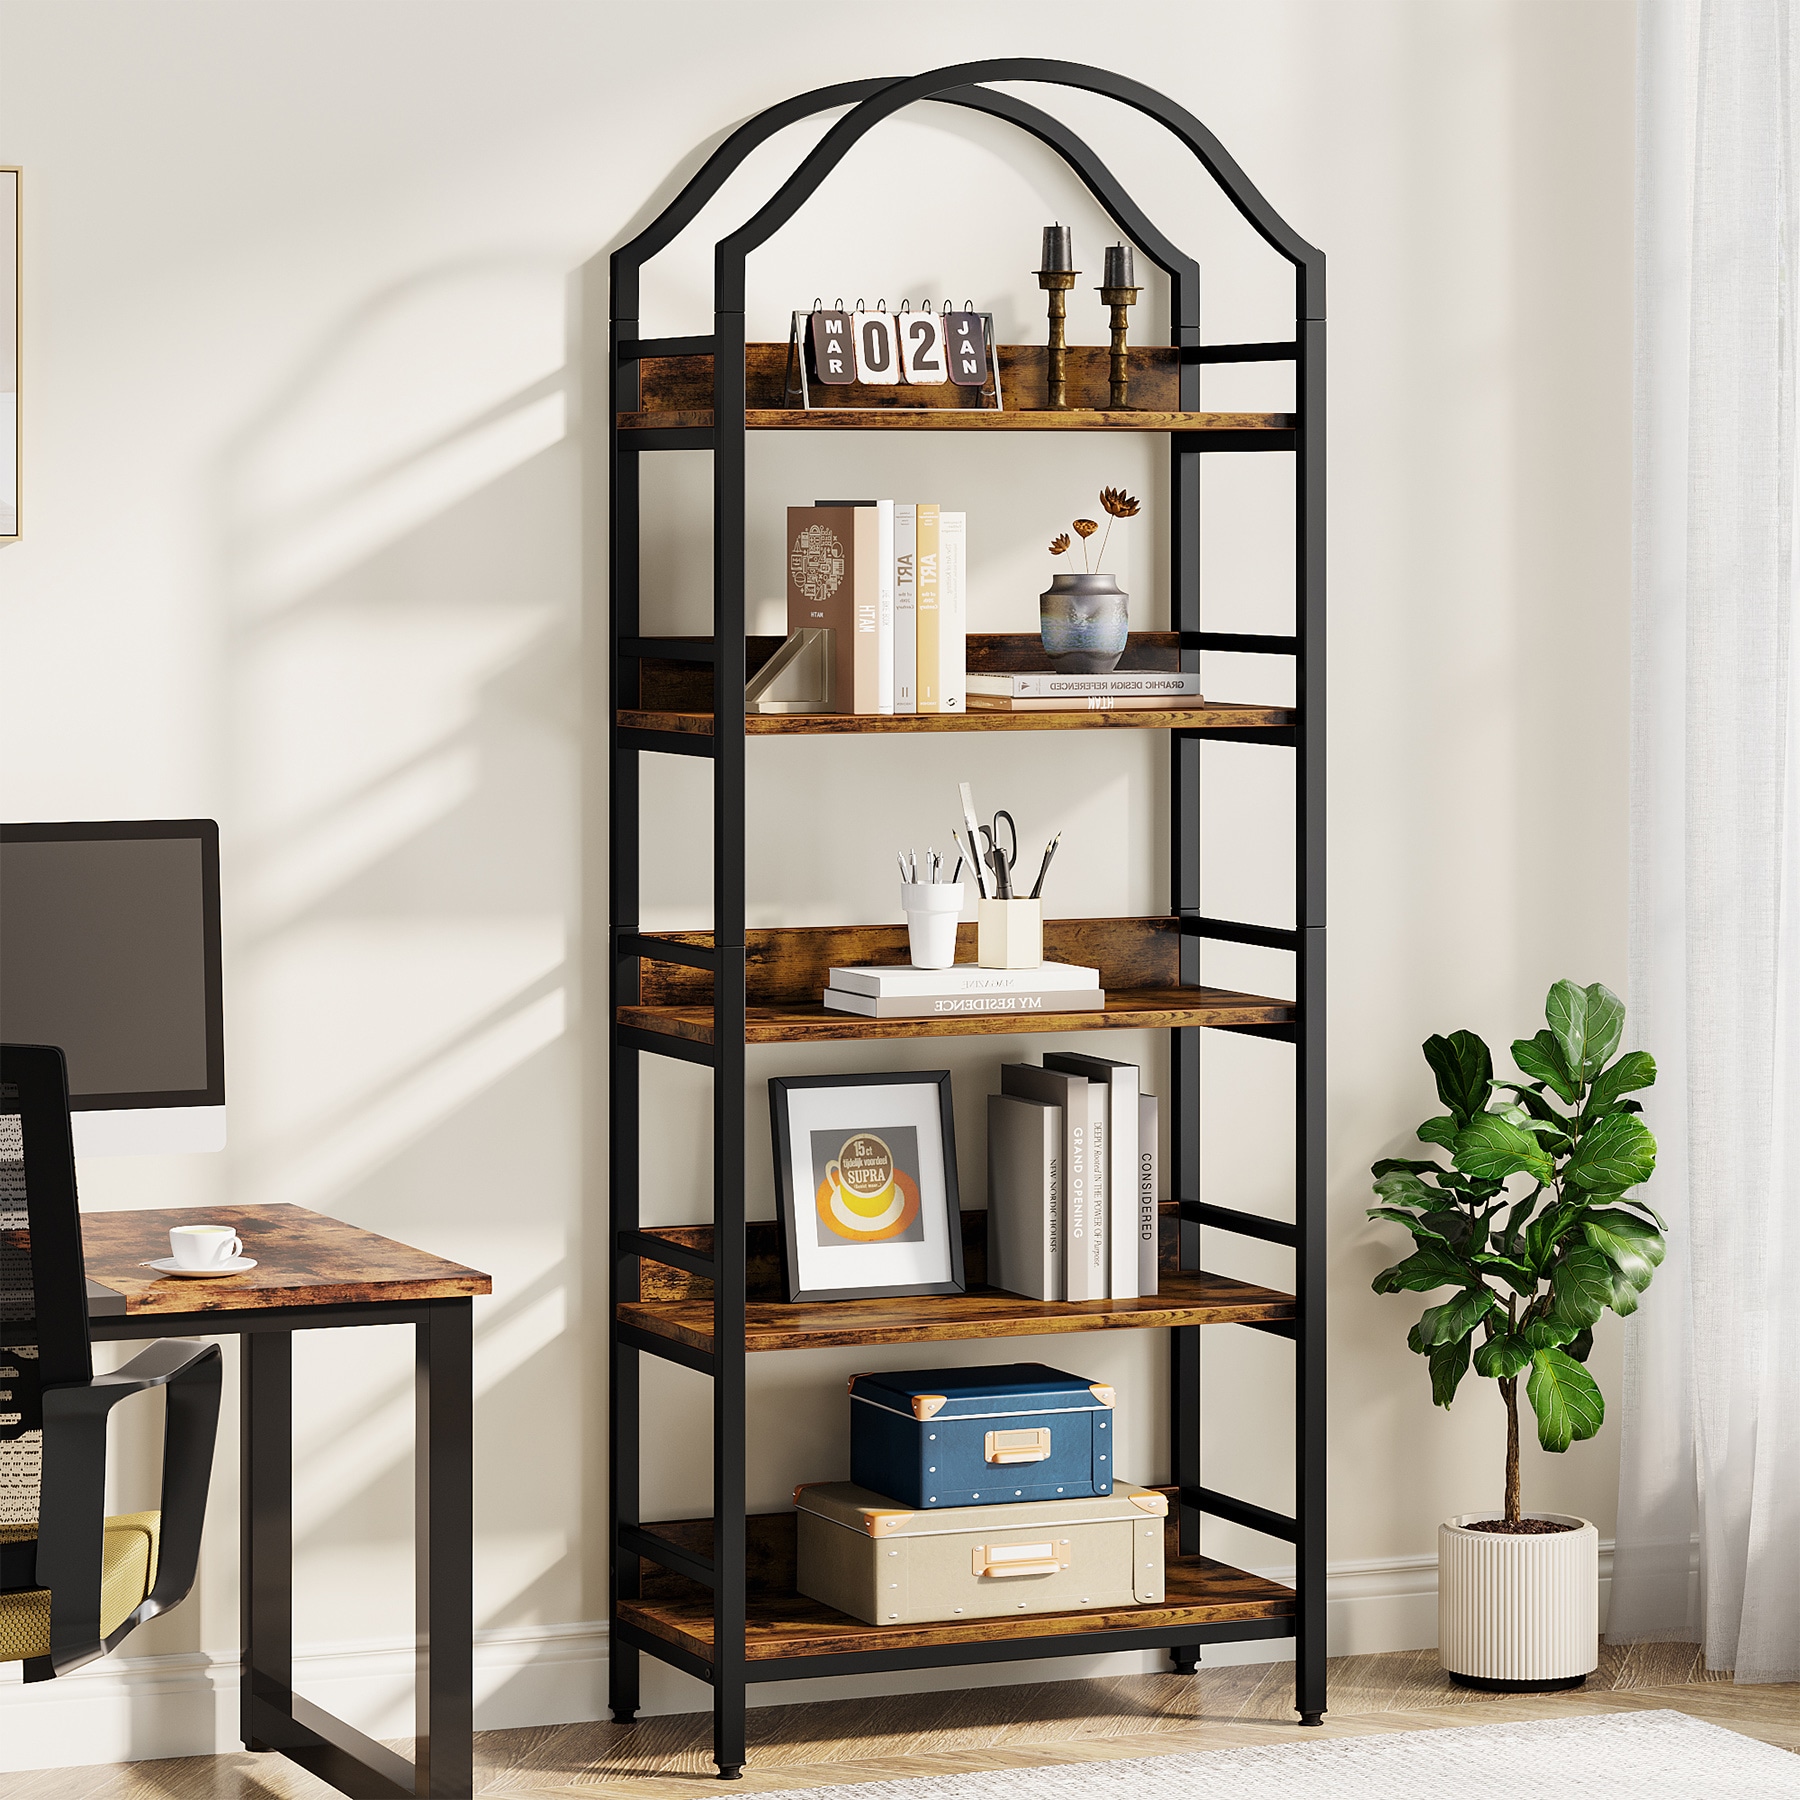 Tribesigns Rustic Brown and Black Metal 7-Shelf Corner Bookcase (13.4-in W x 78.74-in H x 13.4-in D) Unfinished | HOGA-C0820